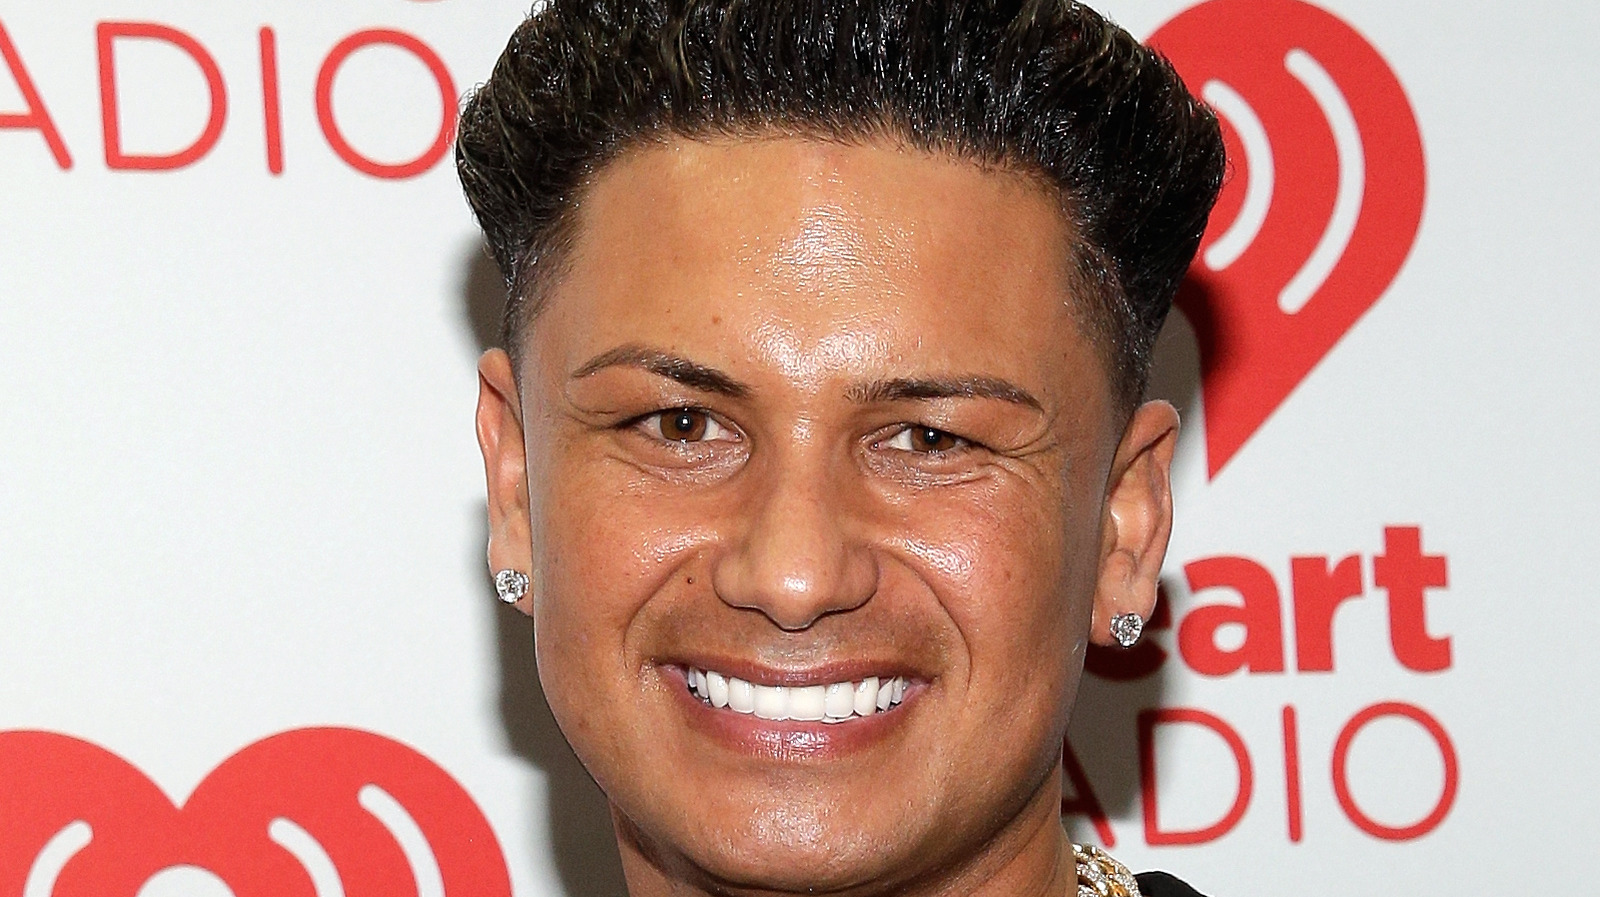 Who Is the Richest 'Jersey Shore' Cast Member?